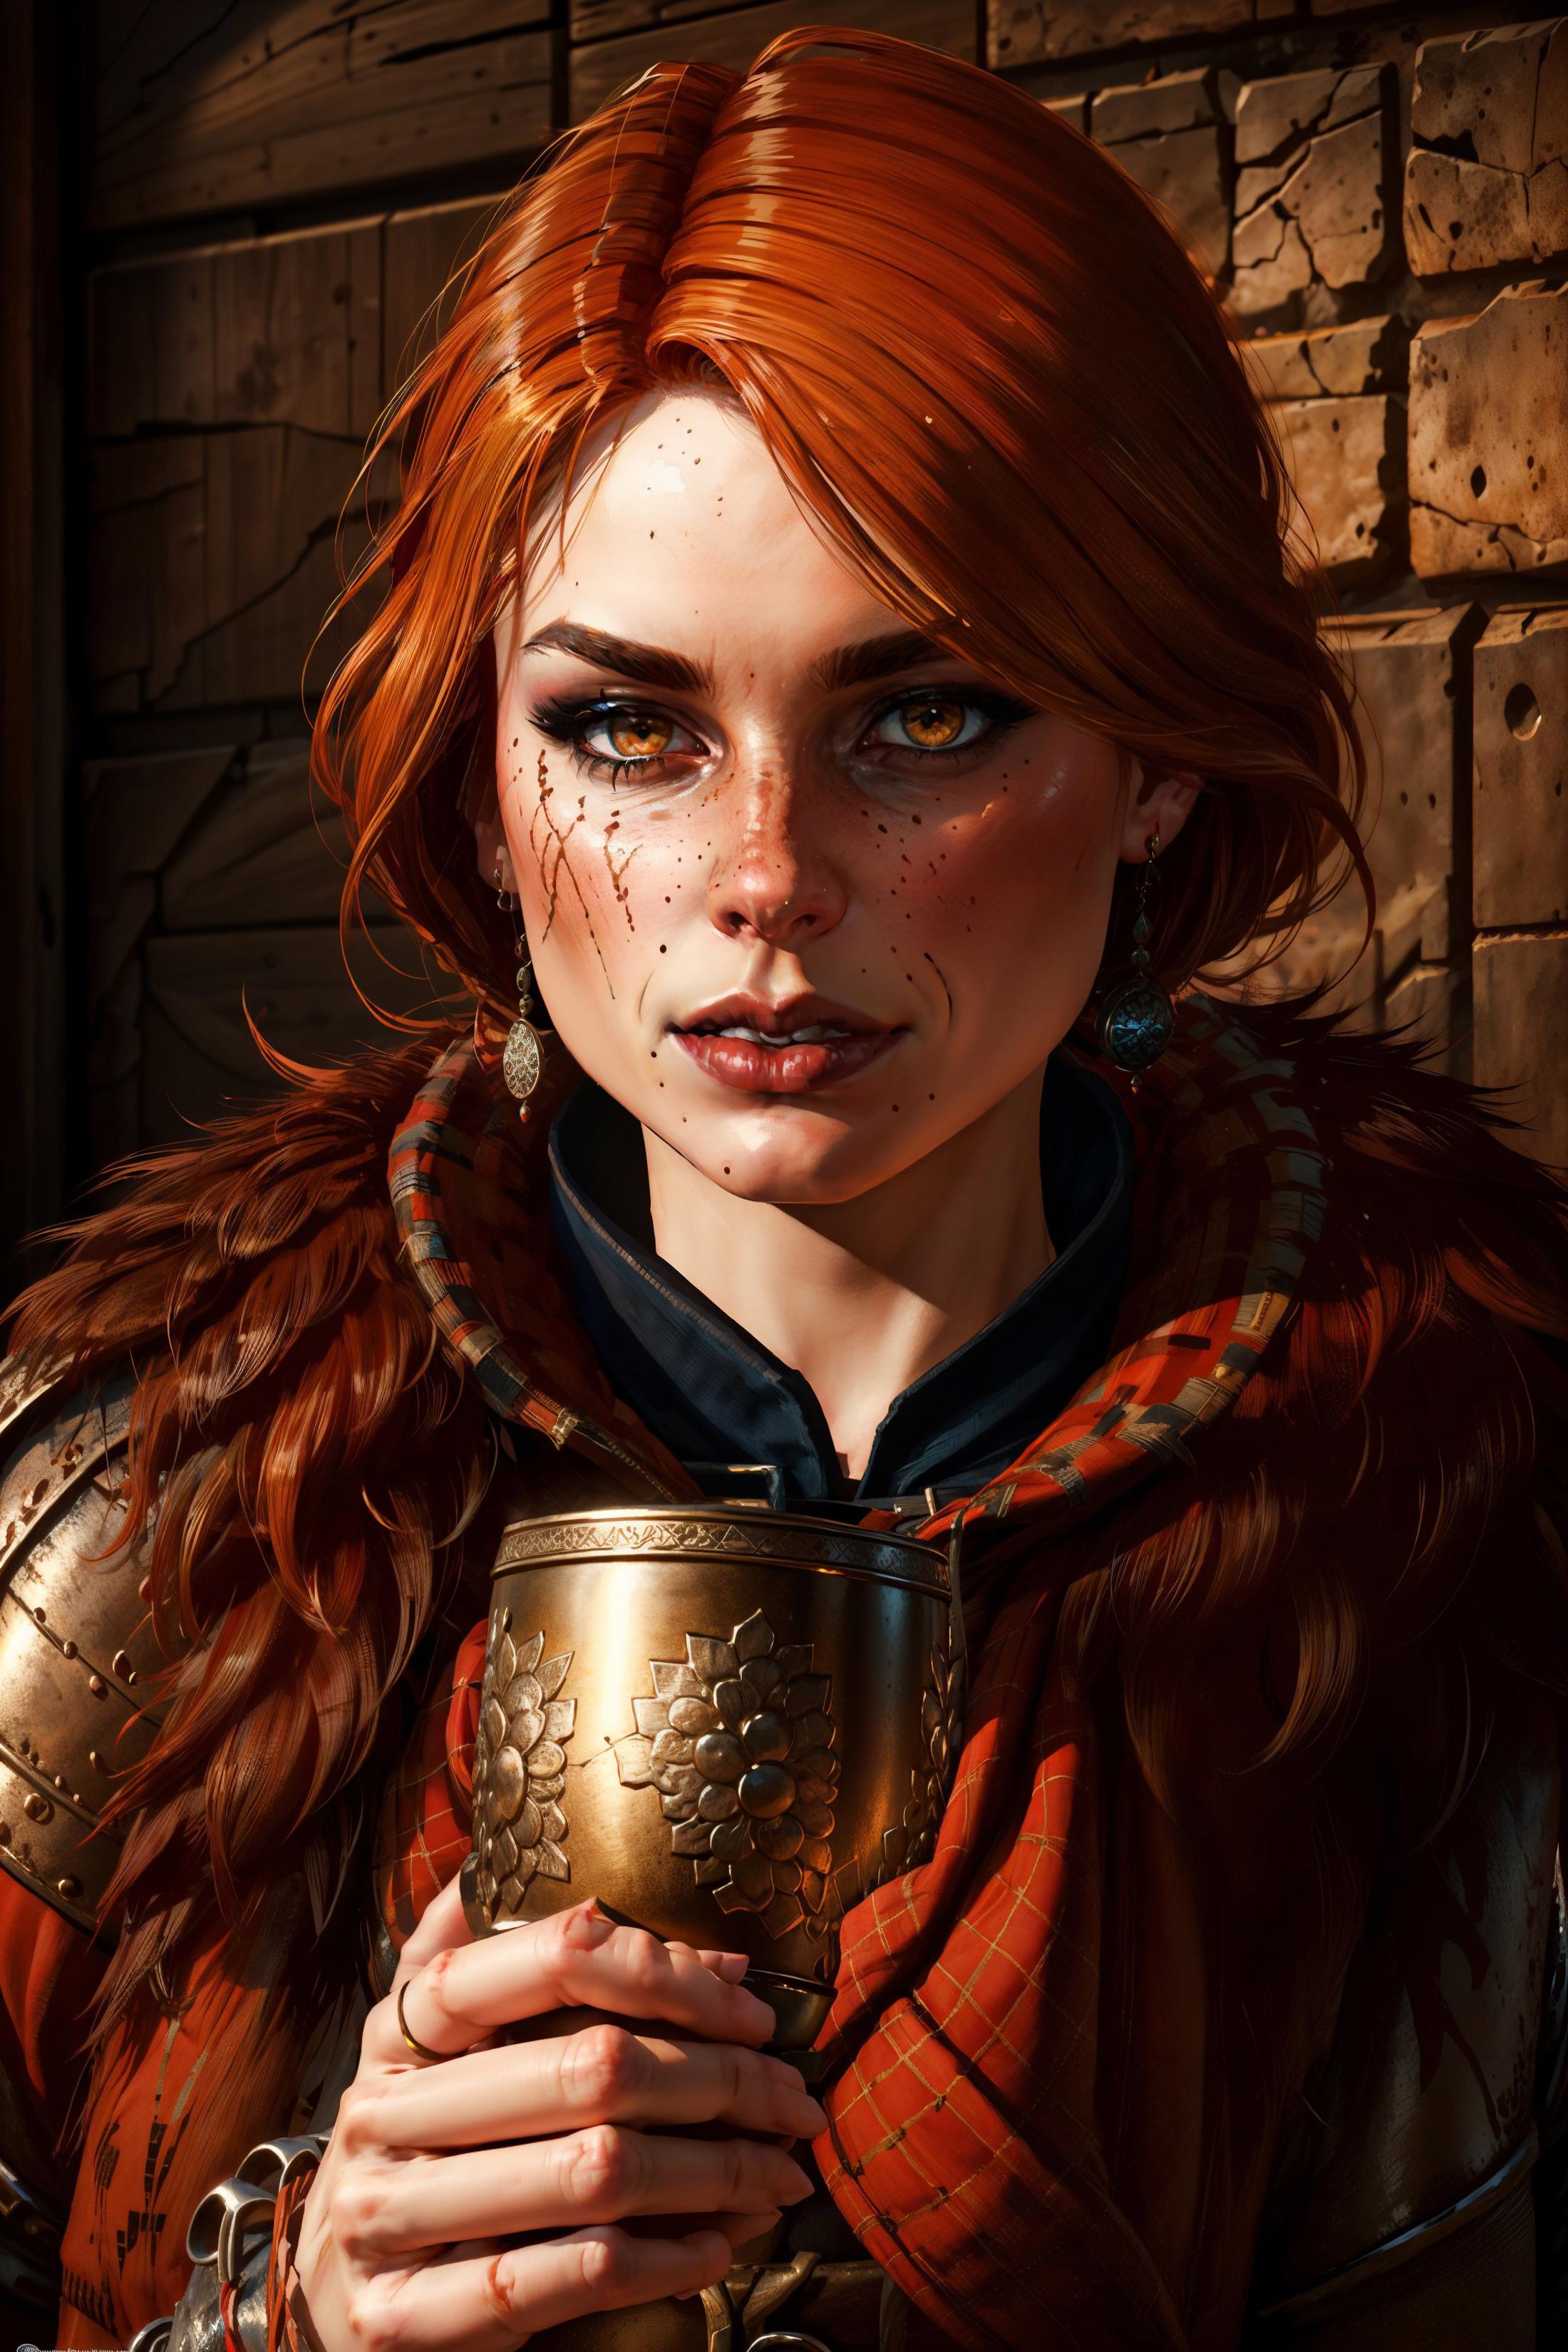 Cerys an Craite | The Witcher 3 : Wild Hunt image by soul3142